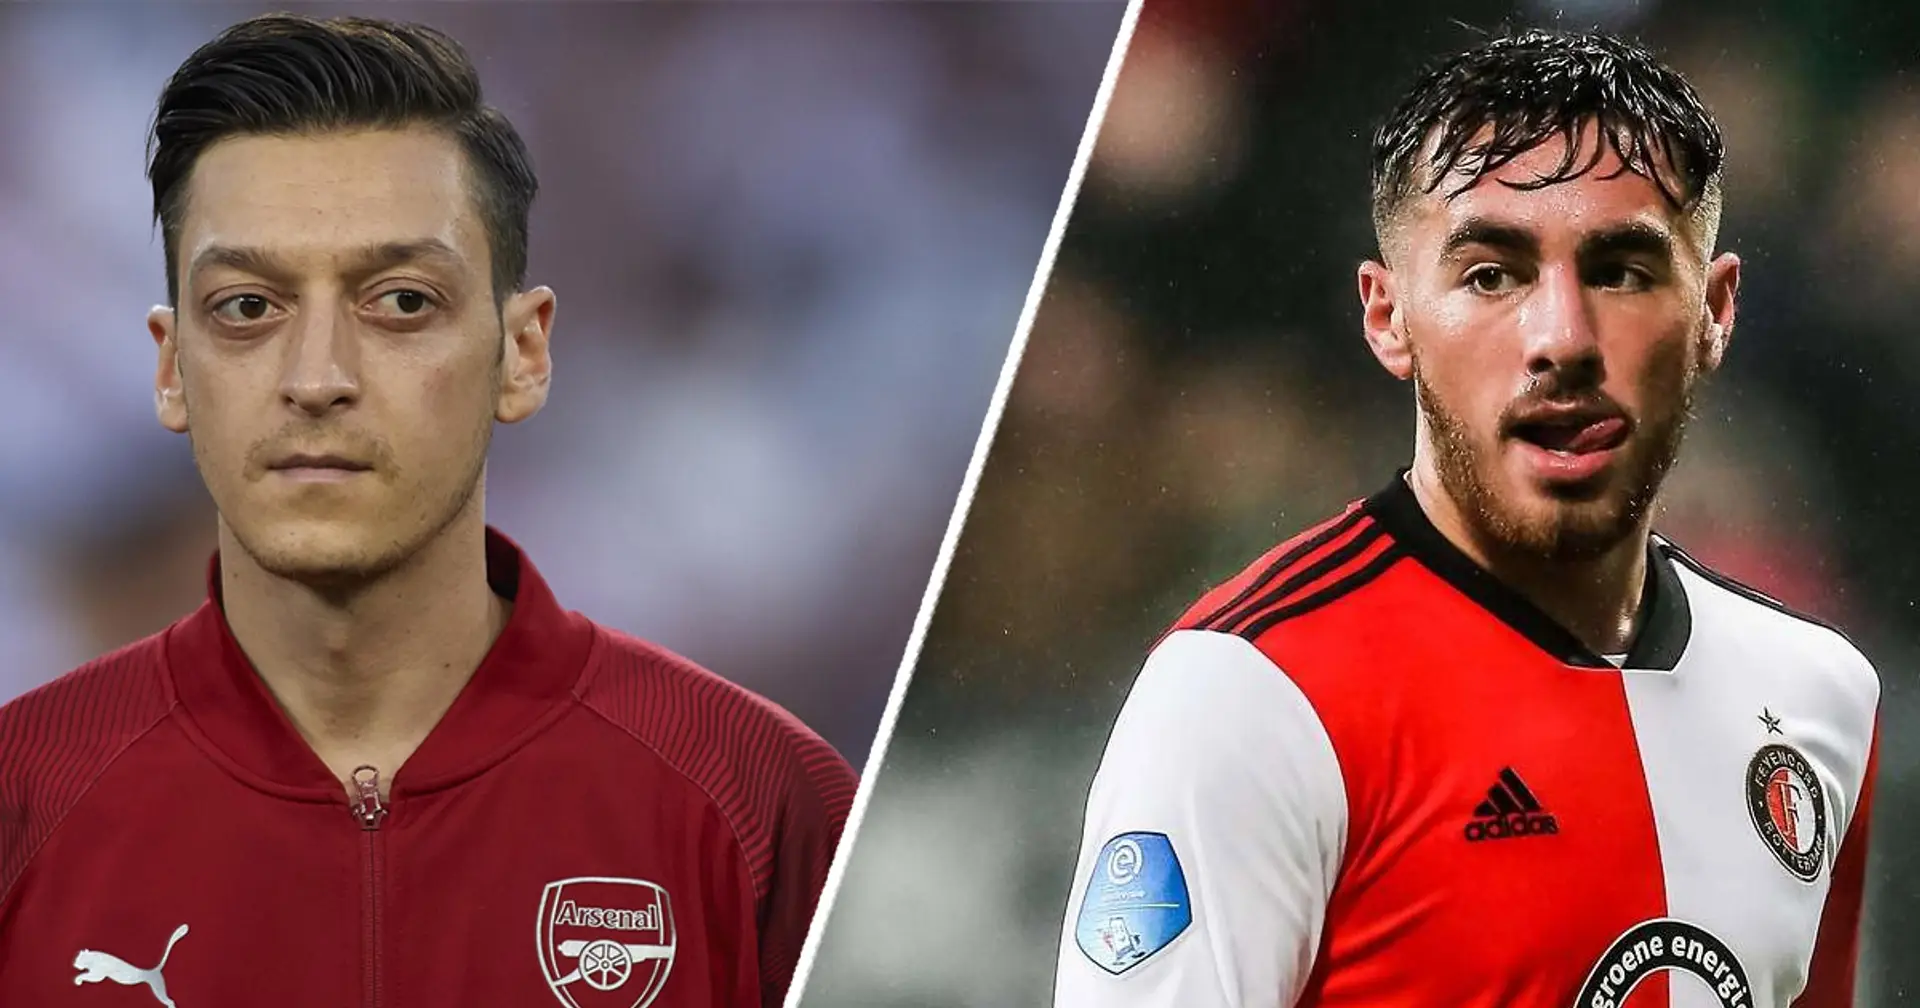 Arsenal 'very serious' about Orkun Kokcu: 3 PROs and CONs of landing Ozil's heir